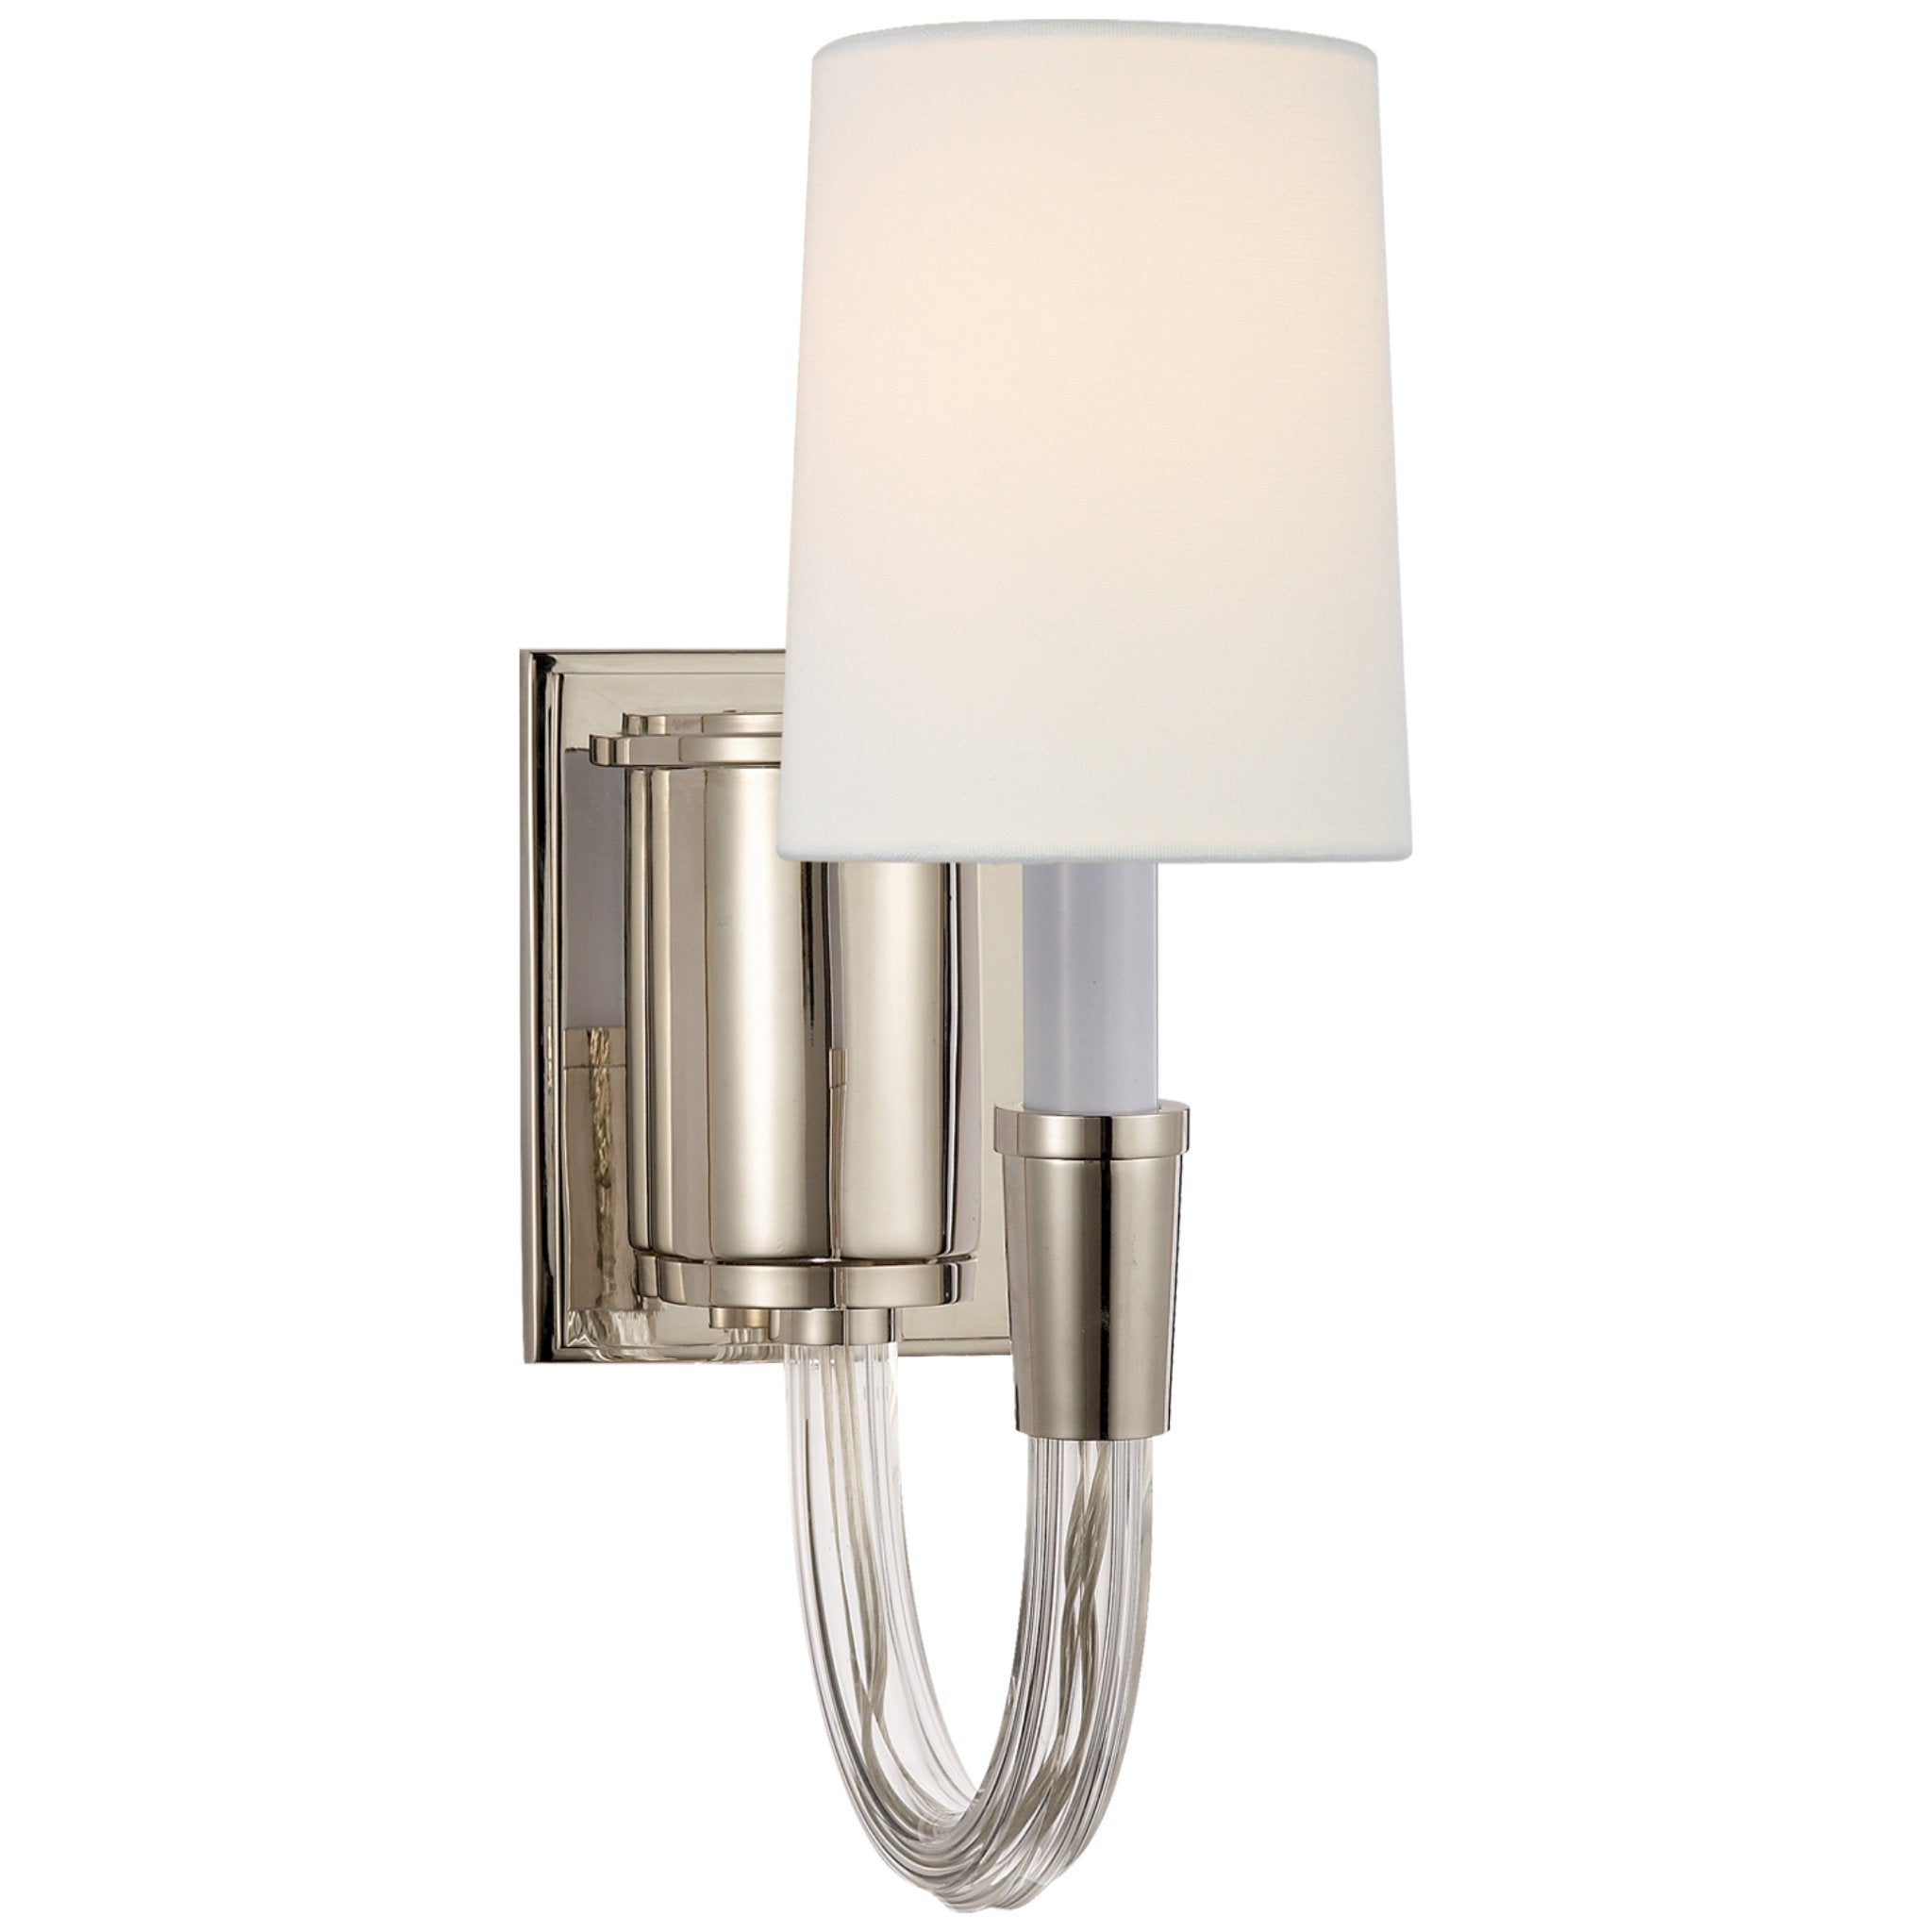 Thomas O'Brien Vivian Single Sconce in Polished Nickel with Linen Shade